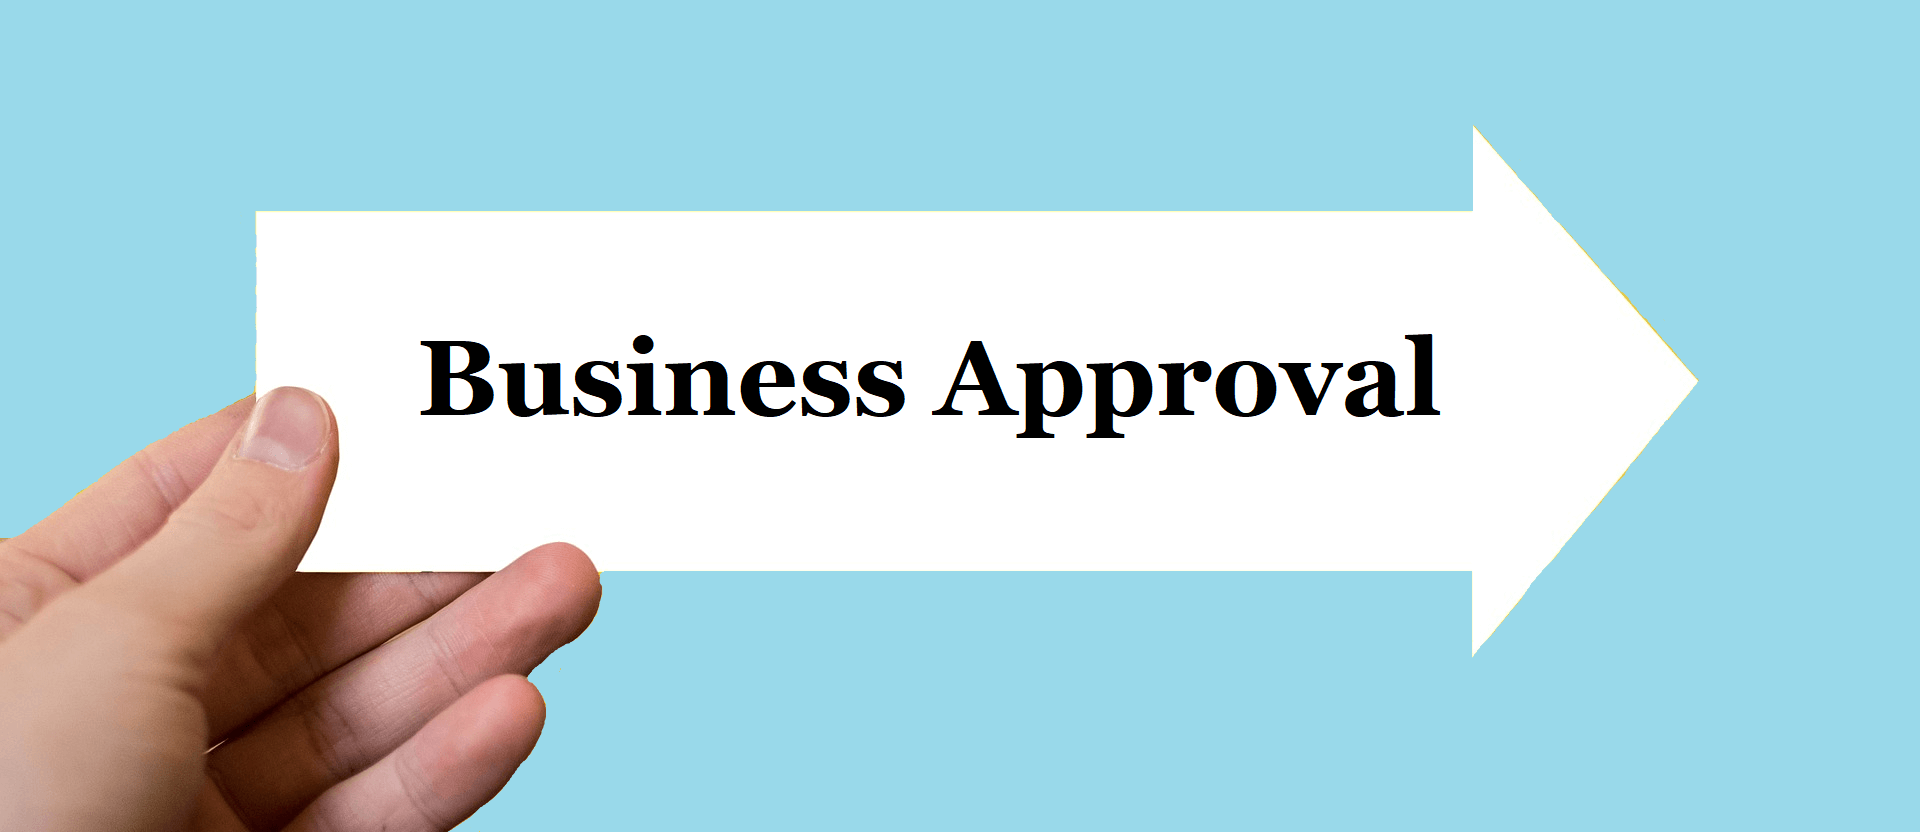 Getting approval for business setup in dubai